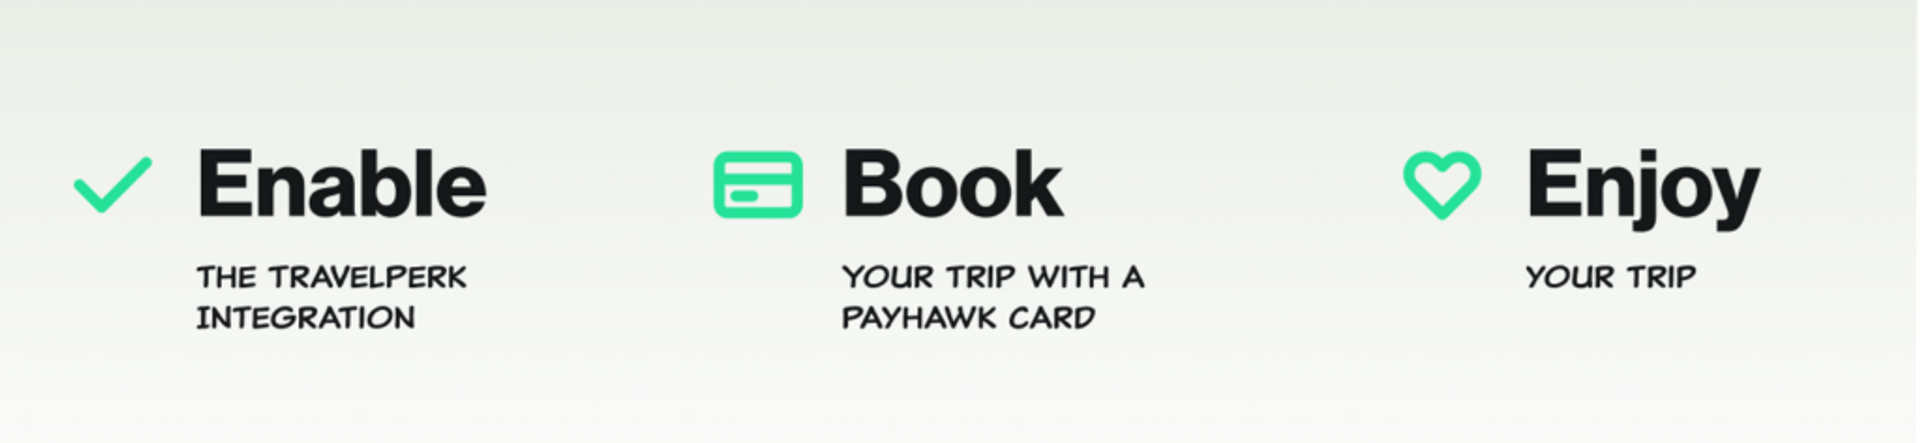 How to enable TravelPerk integration with Payhawk's business travel expense management software